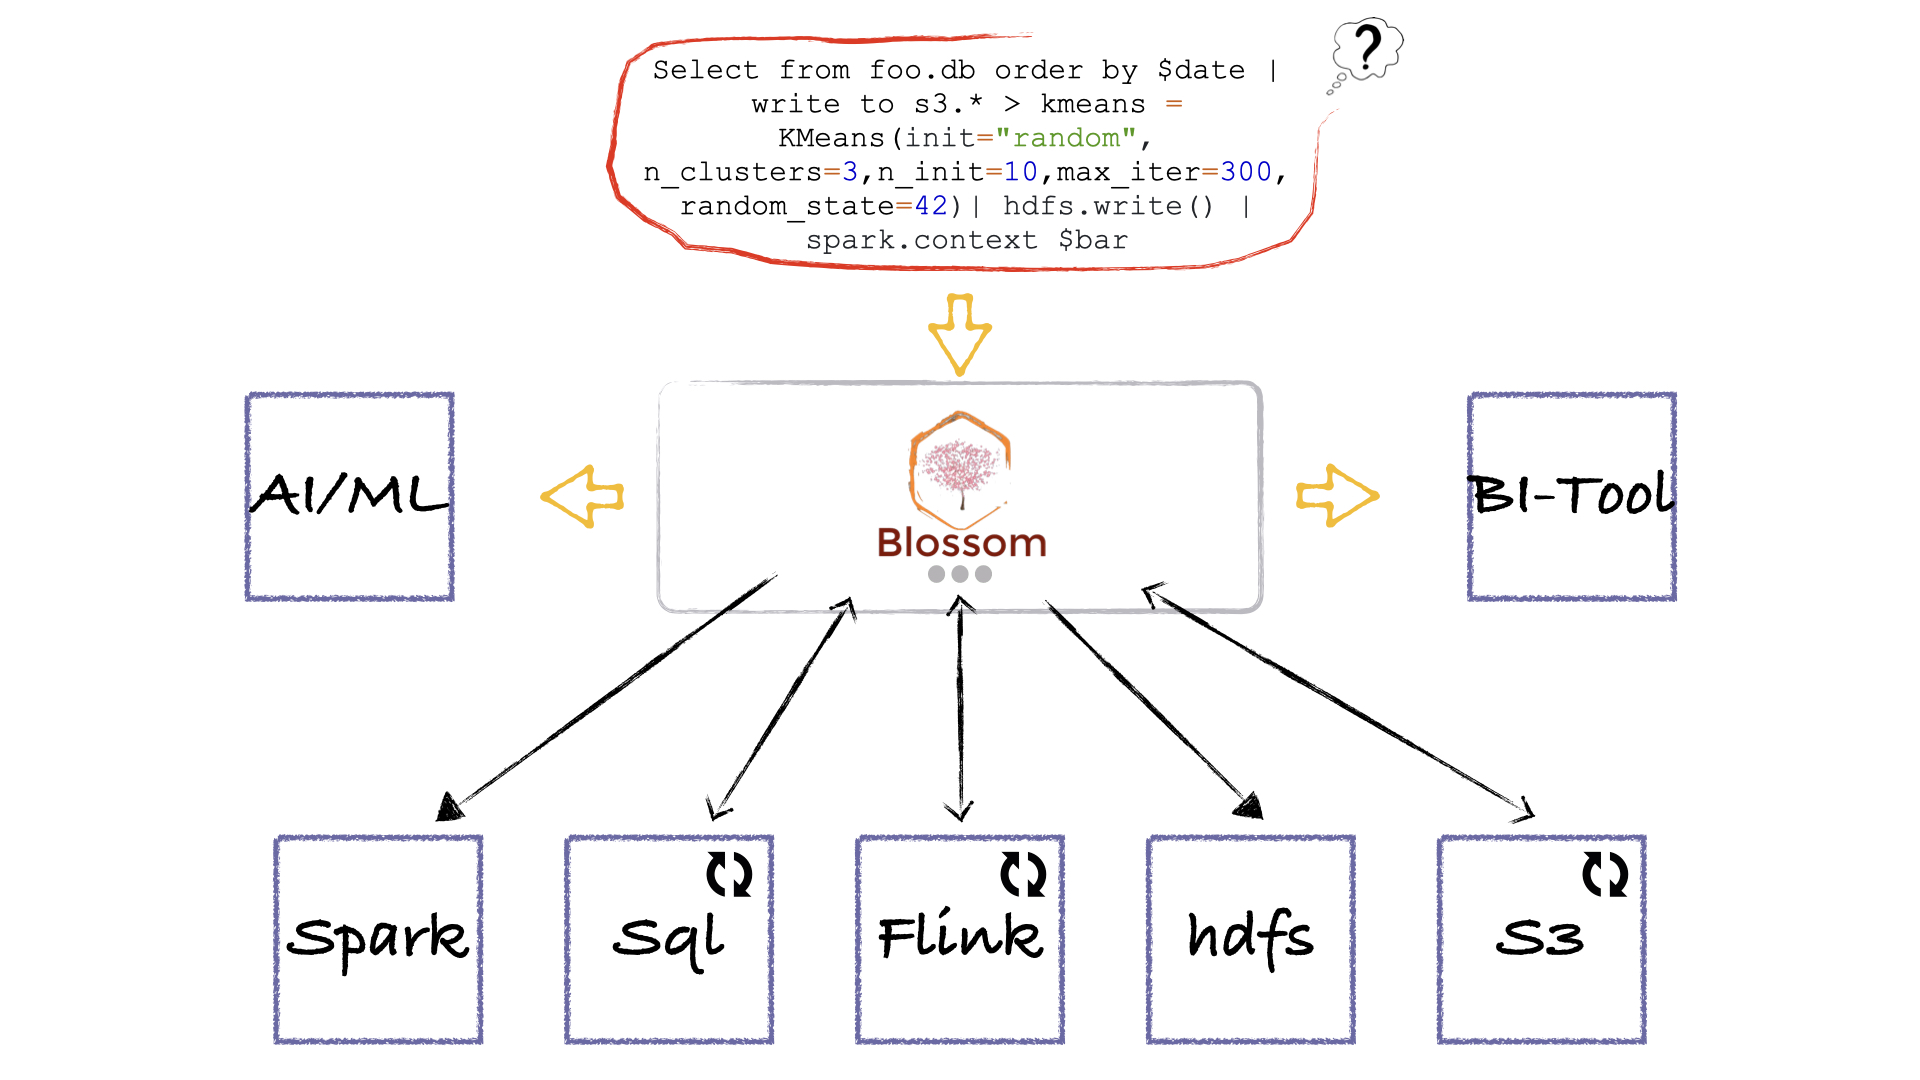 Blossom works with all data processing frameworks